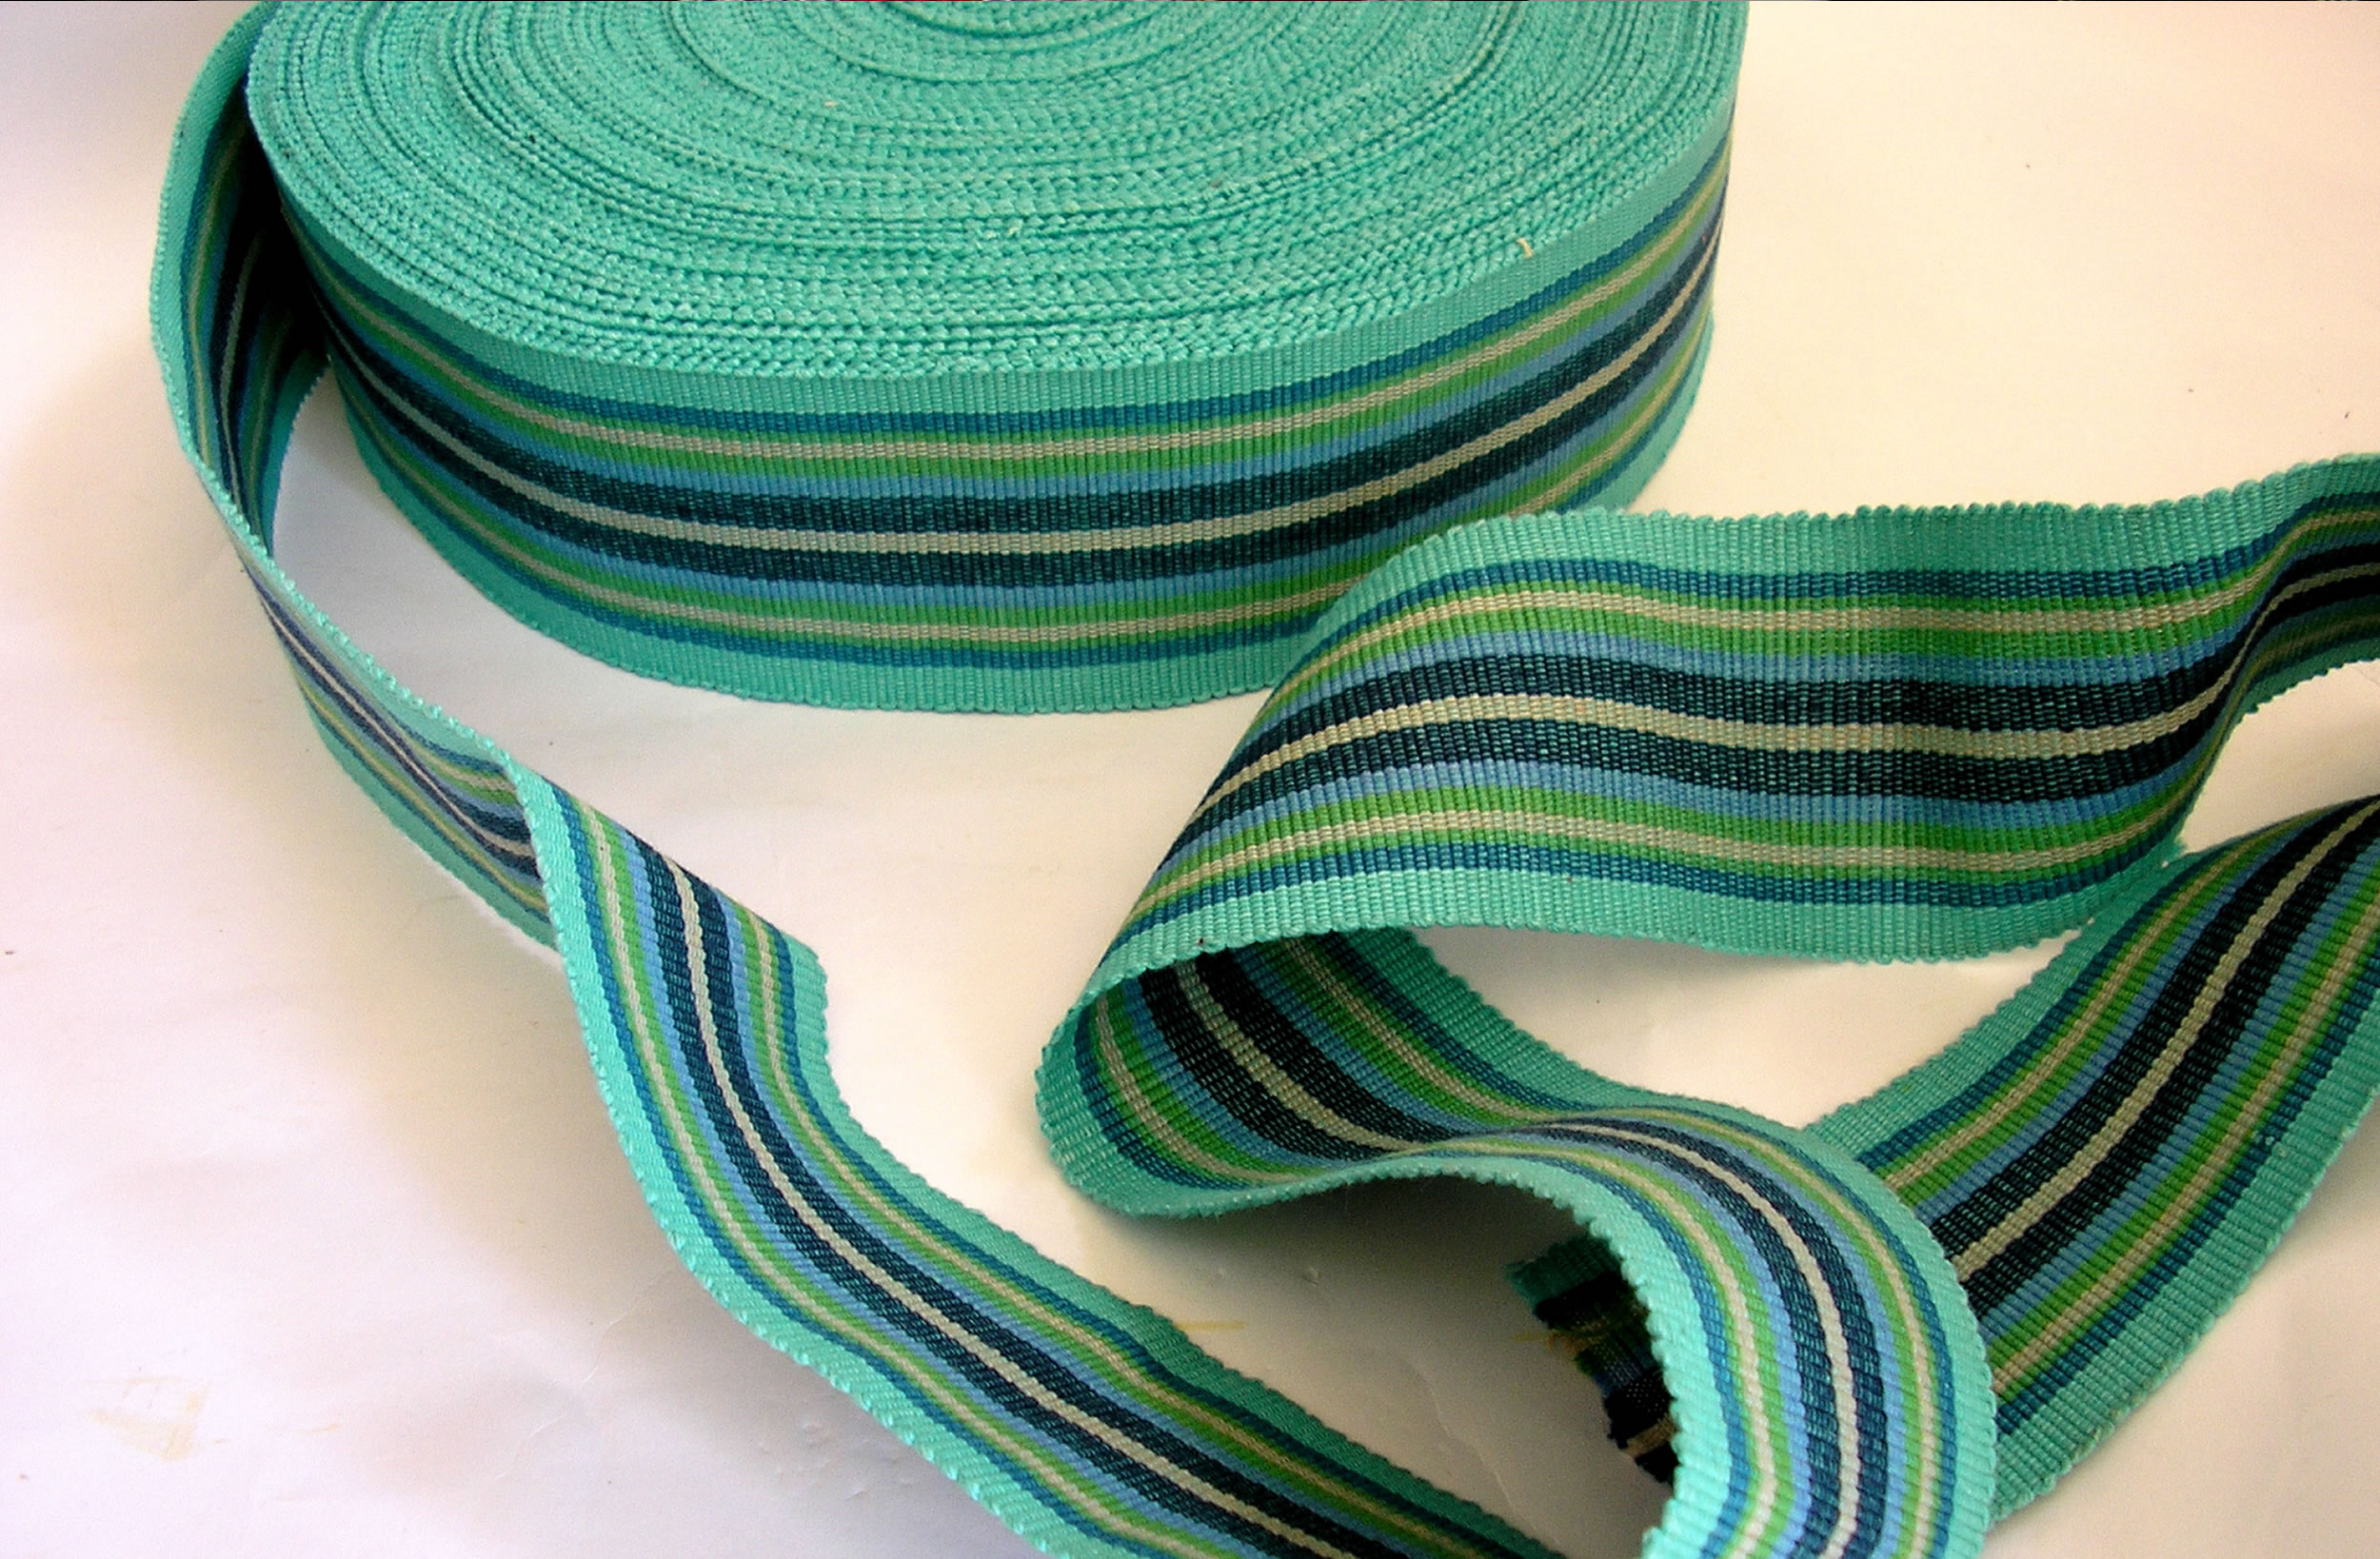 Turquoise, Blue, Green Striped Webbing, Upholstery Webbing Fencing Stripes